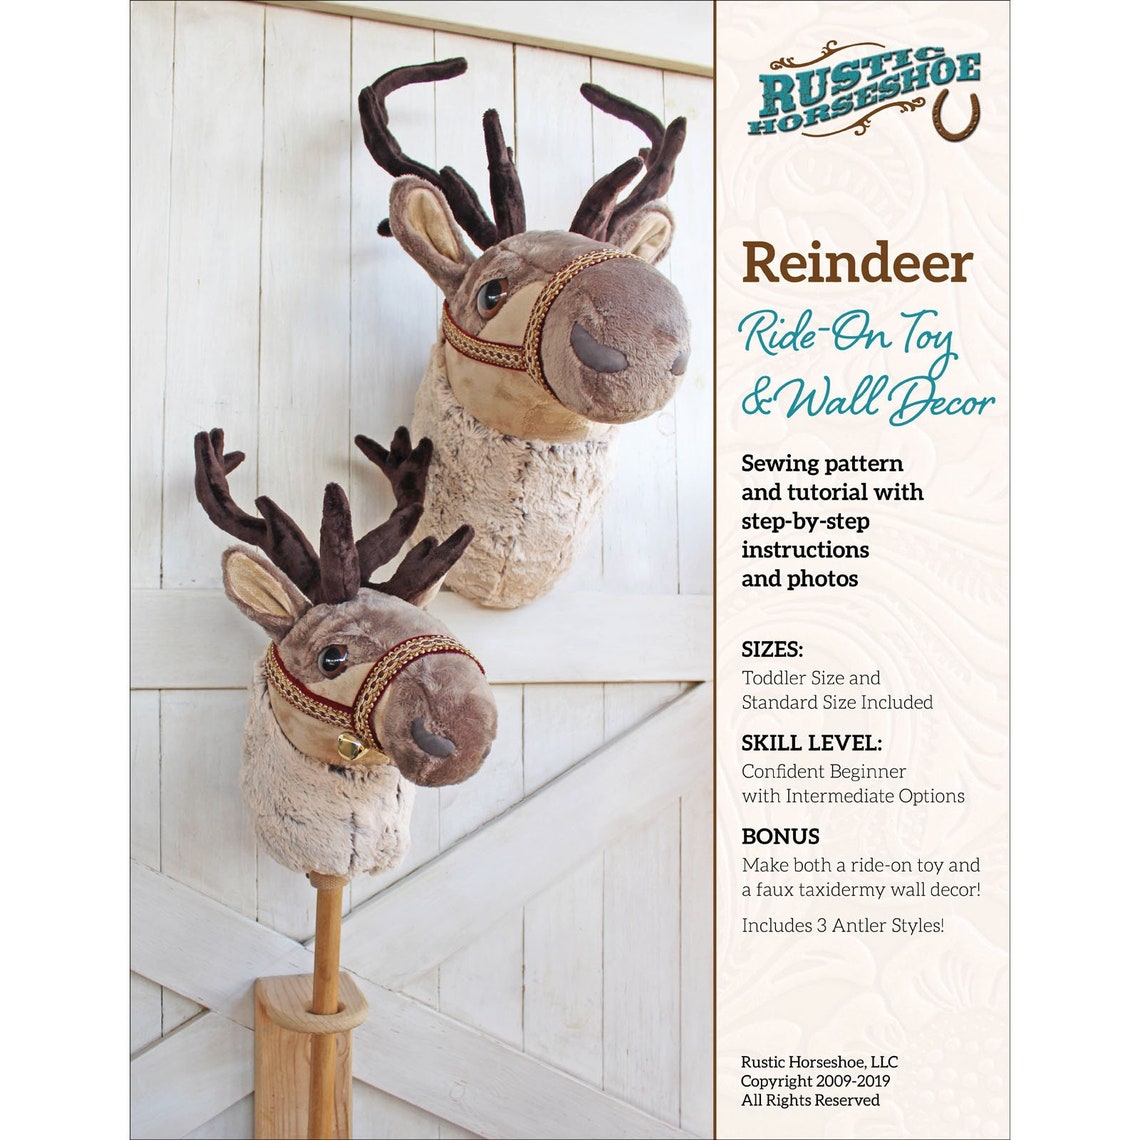 Reindeer Ride-on Toy & Wall Decor Pattern by Rust Horseshoe - Etsy